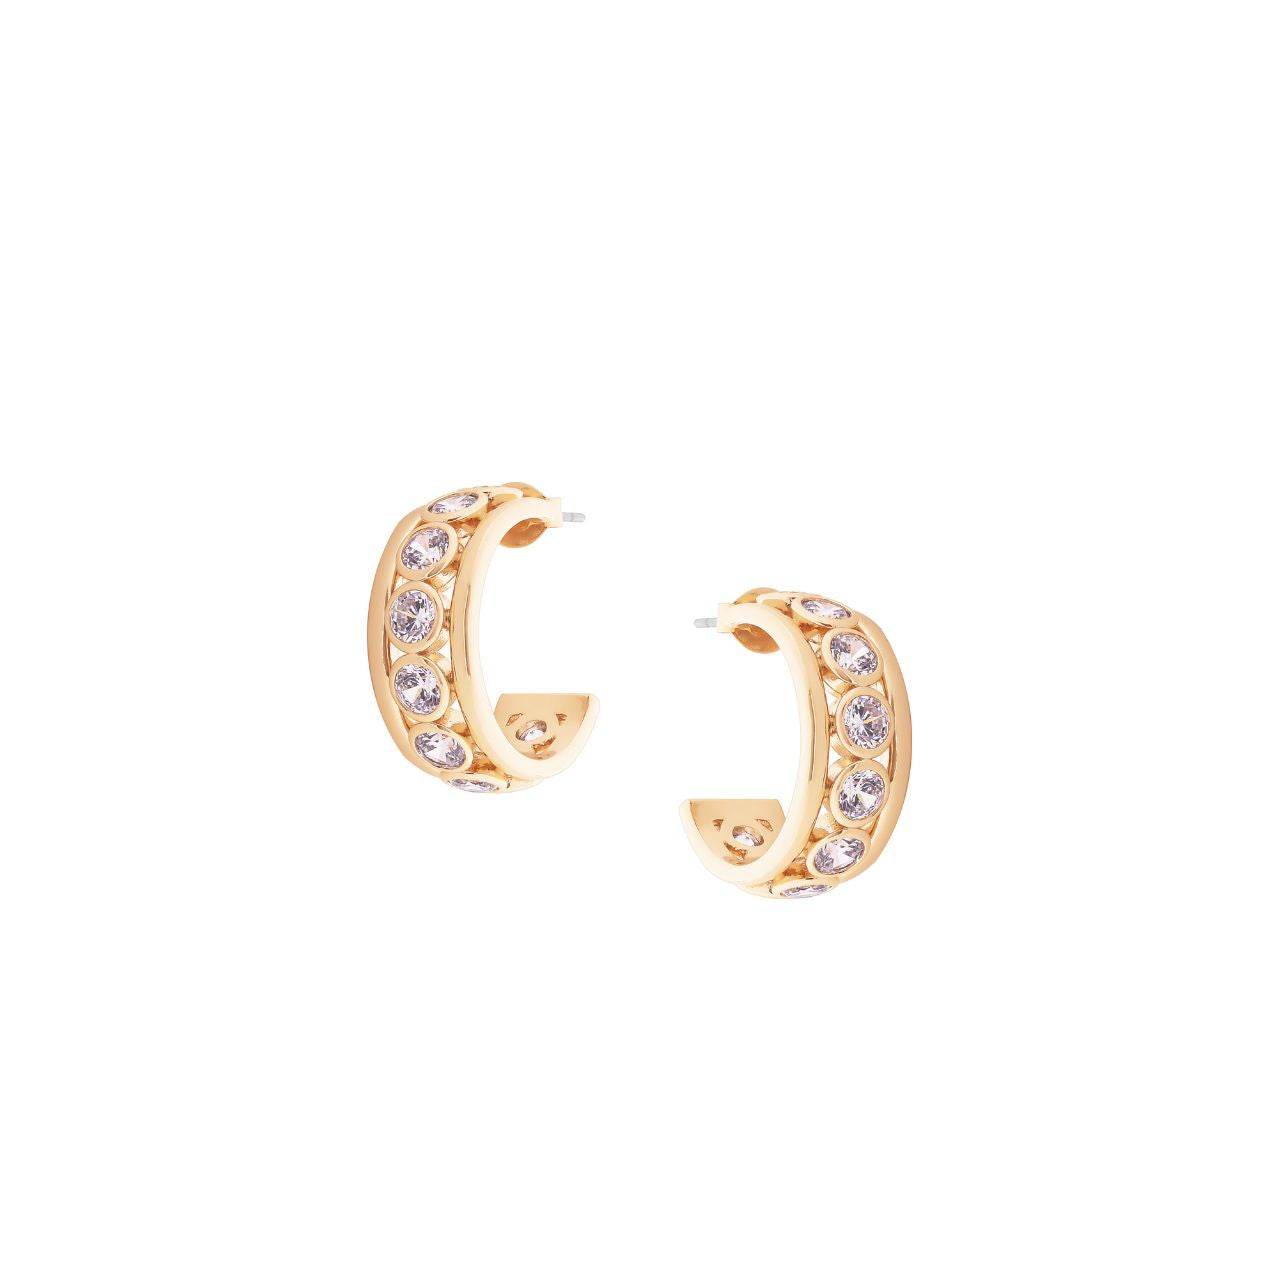 These gold crystal set hoop earrings by Tipperary are a must-have for any jewellery collection. With their stunning crystals, these earrings add a touch of elegance and glamour to any outfit. Crafted with expertise and quality materials, they are the perfect addition to elevate your style.